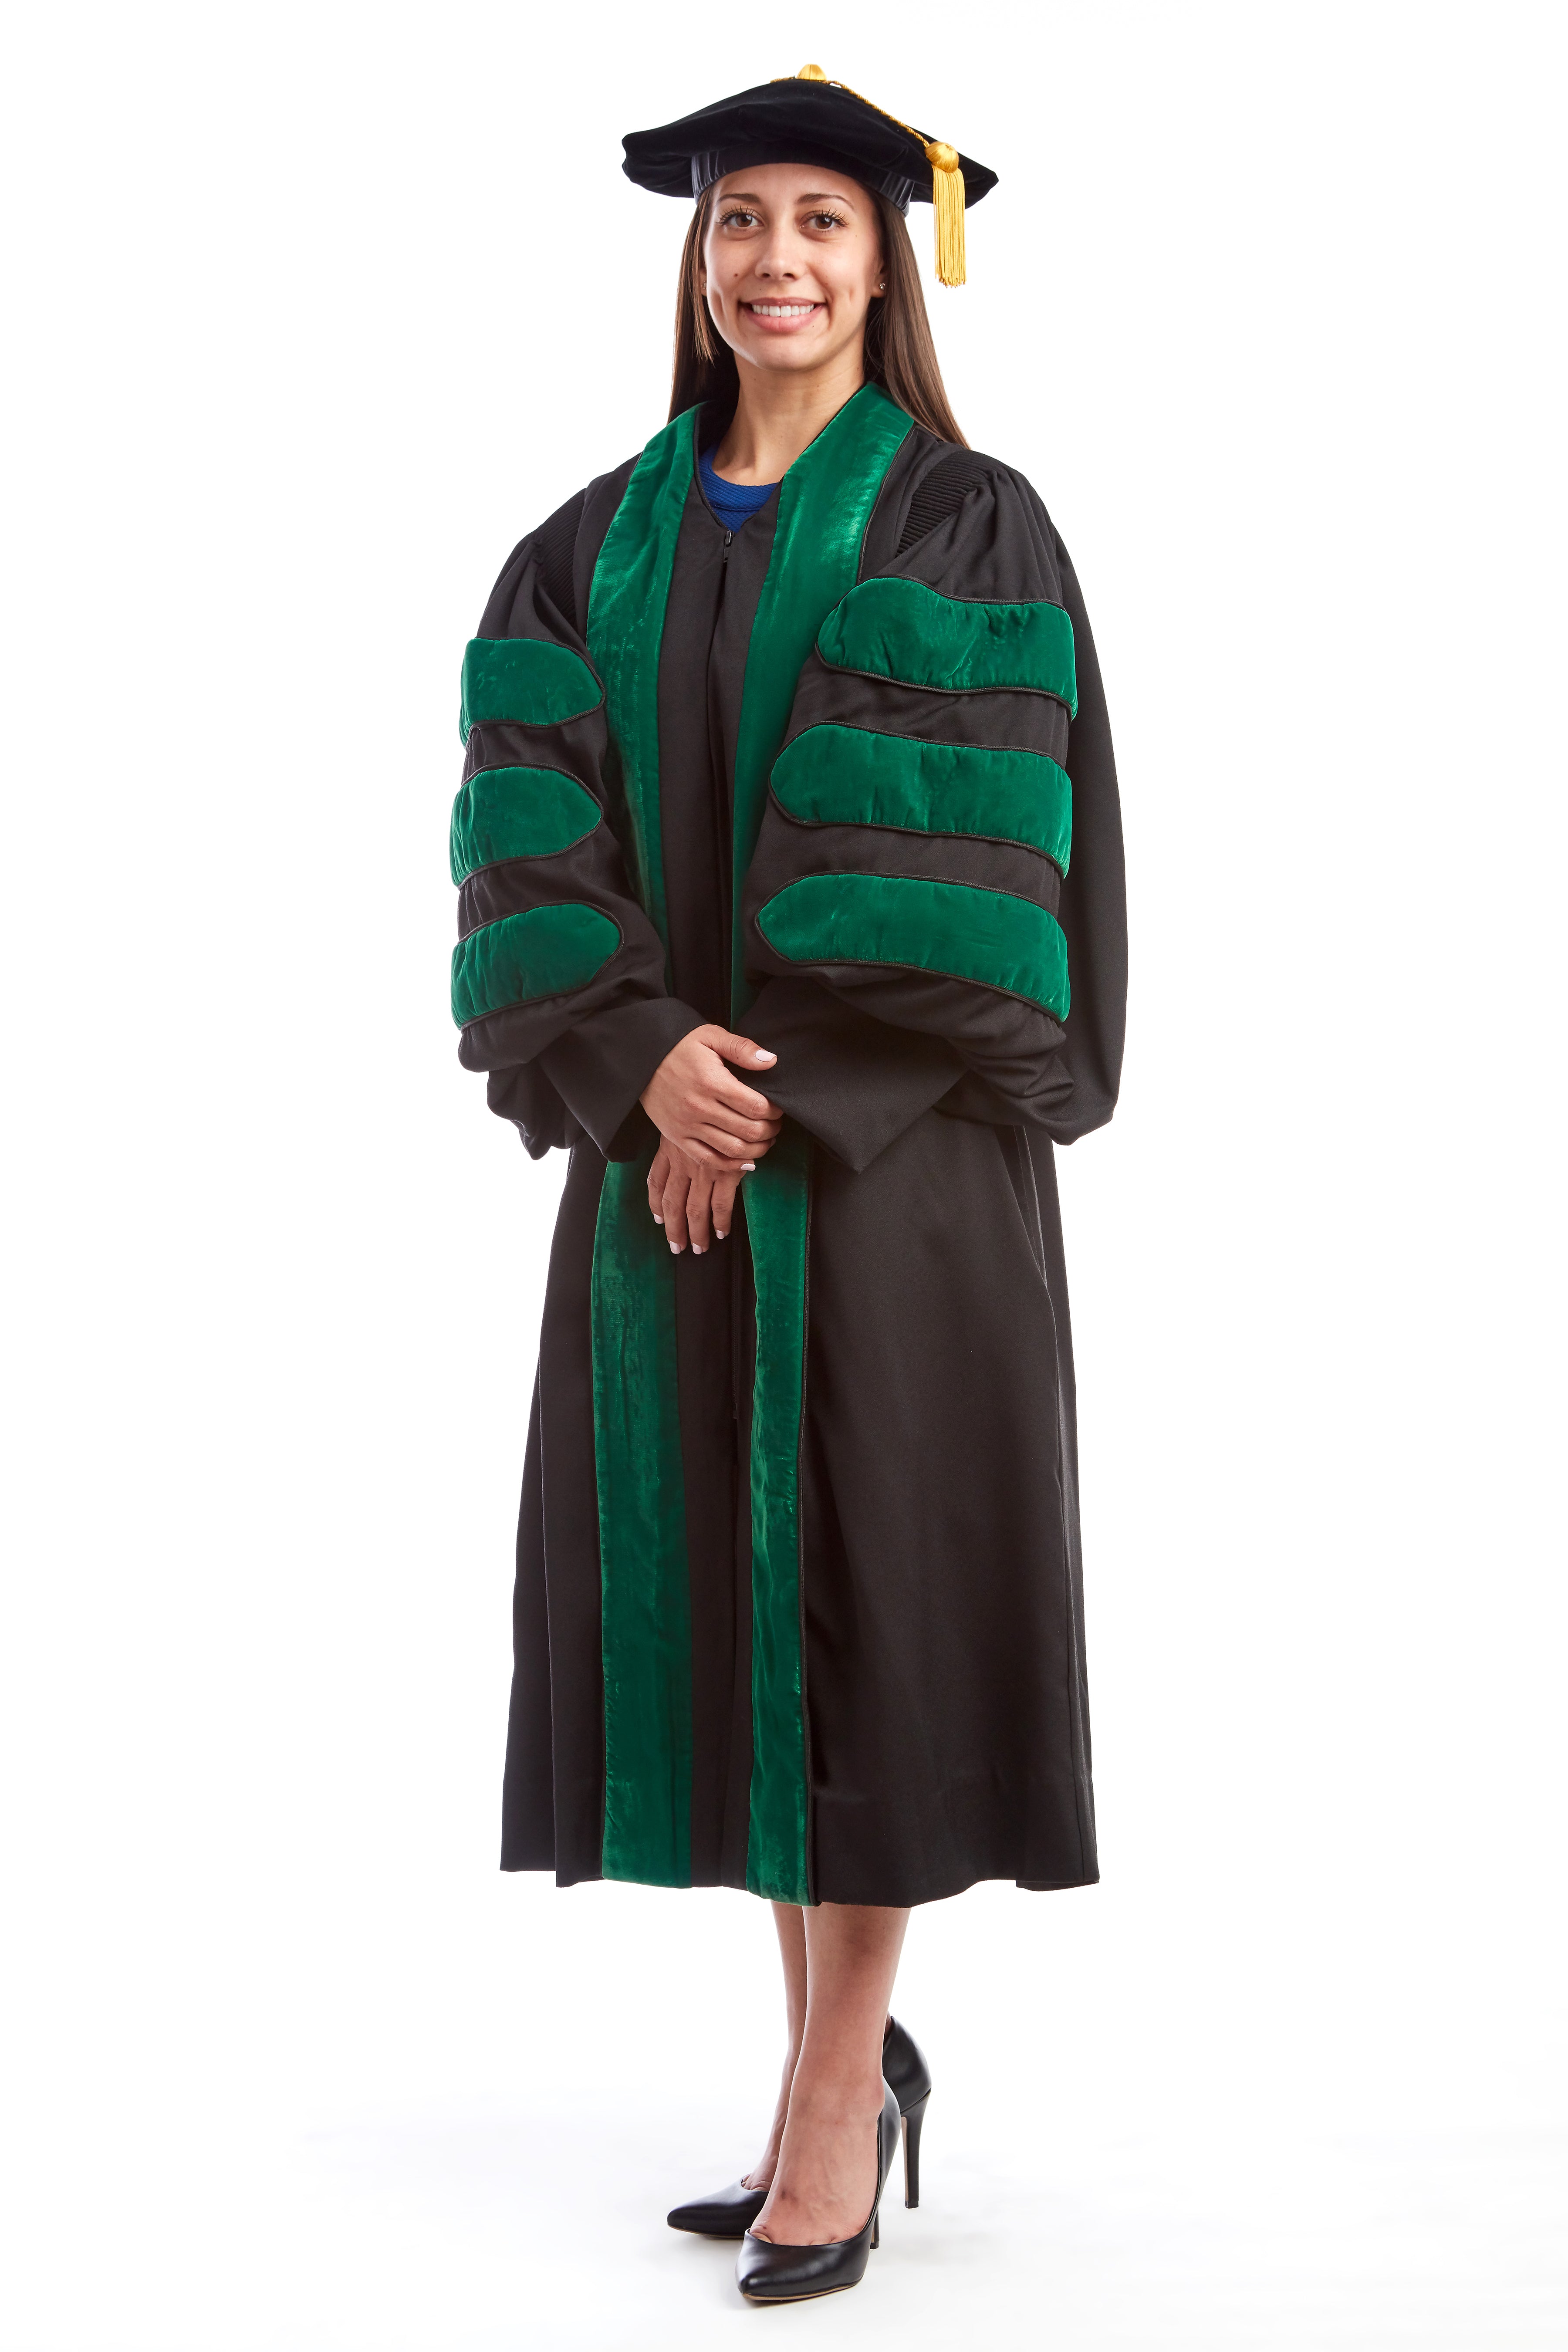 Premium Medical Rental Regalia Set - Medical Gown, Hood, and 8-Sided Tam - CAPGOWN